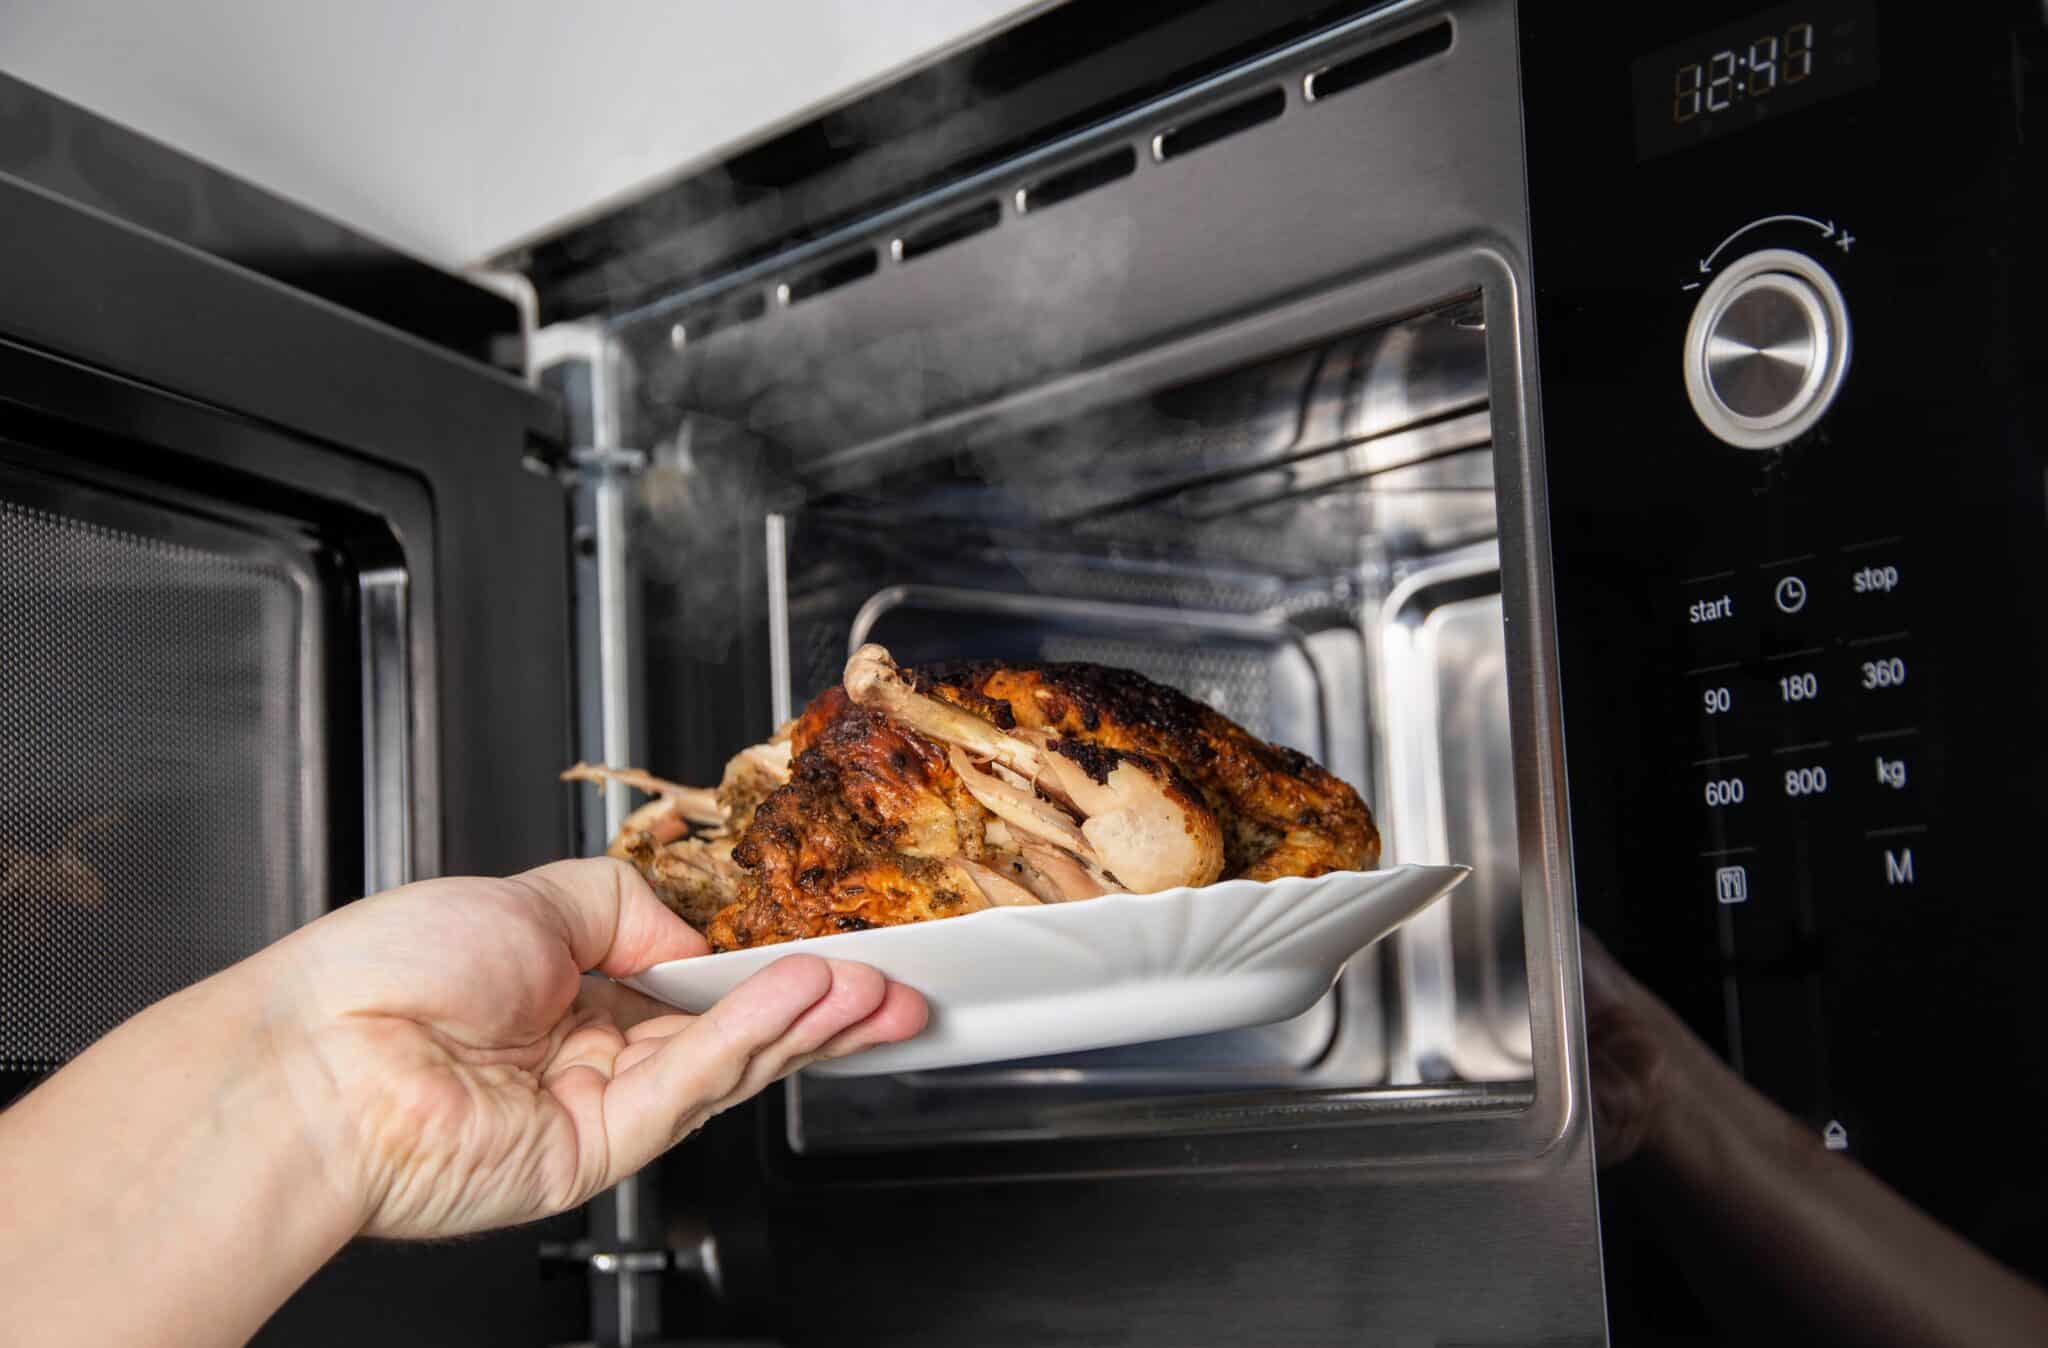 Are Grills in Microwaves Any Good? (Plus 4 Tips To Help!)